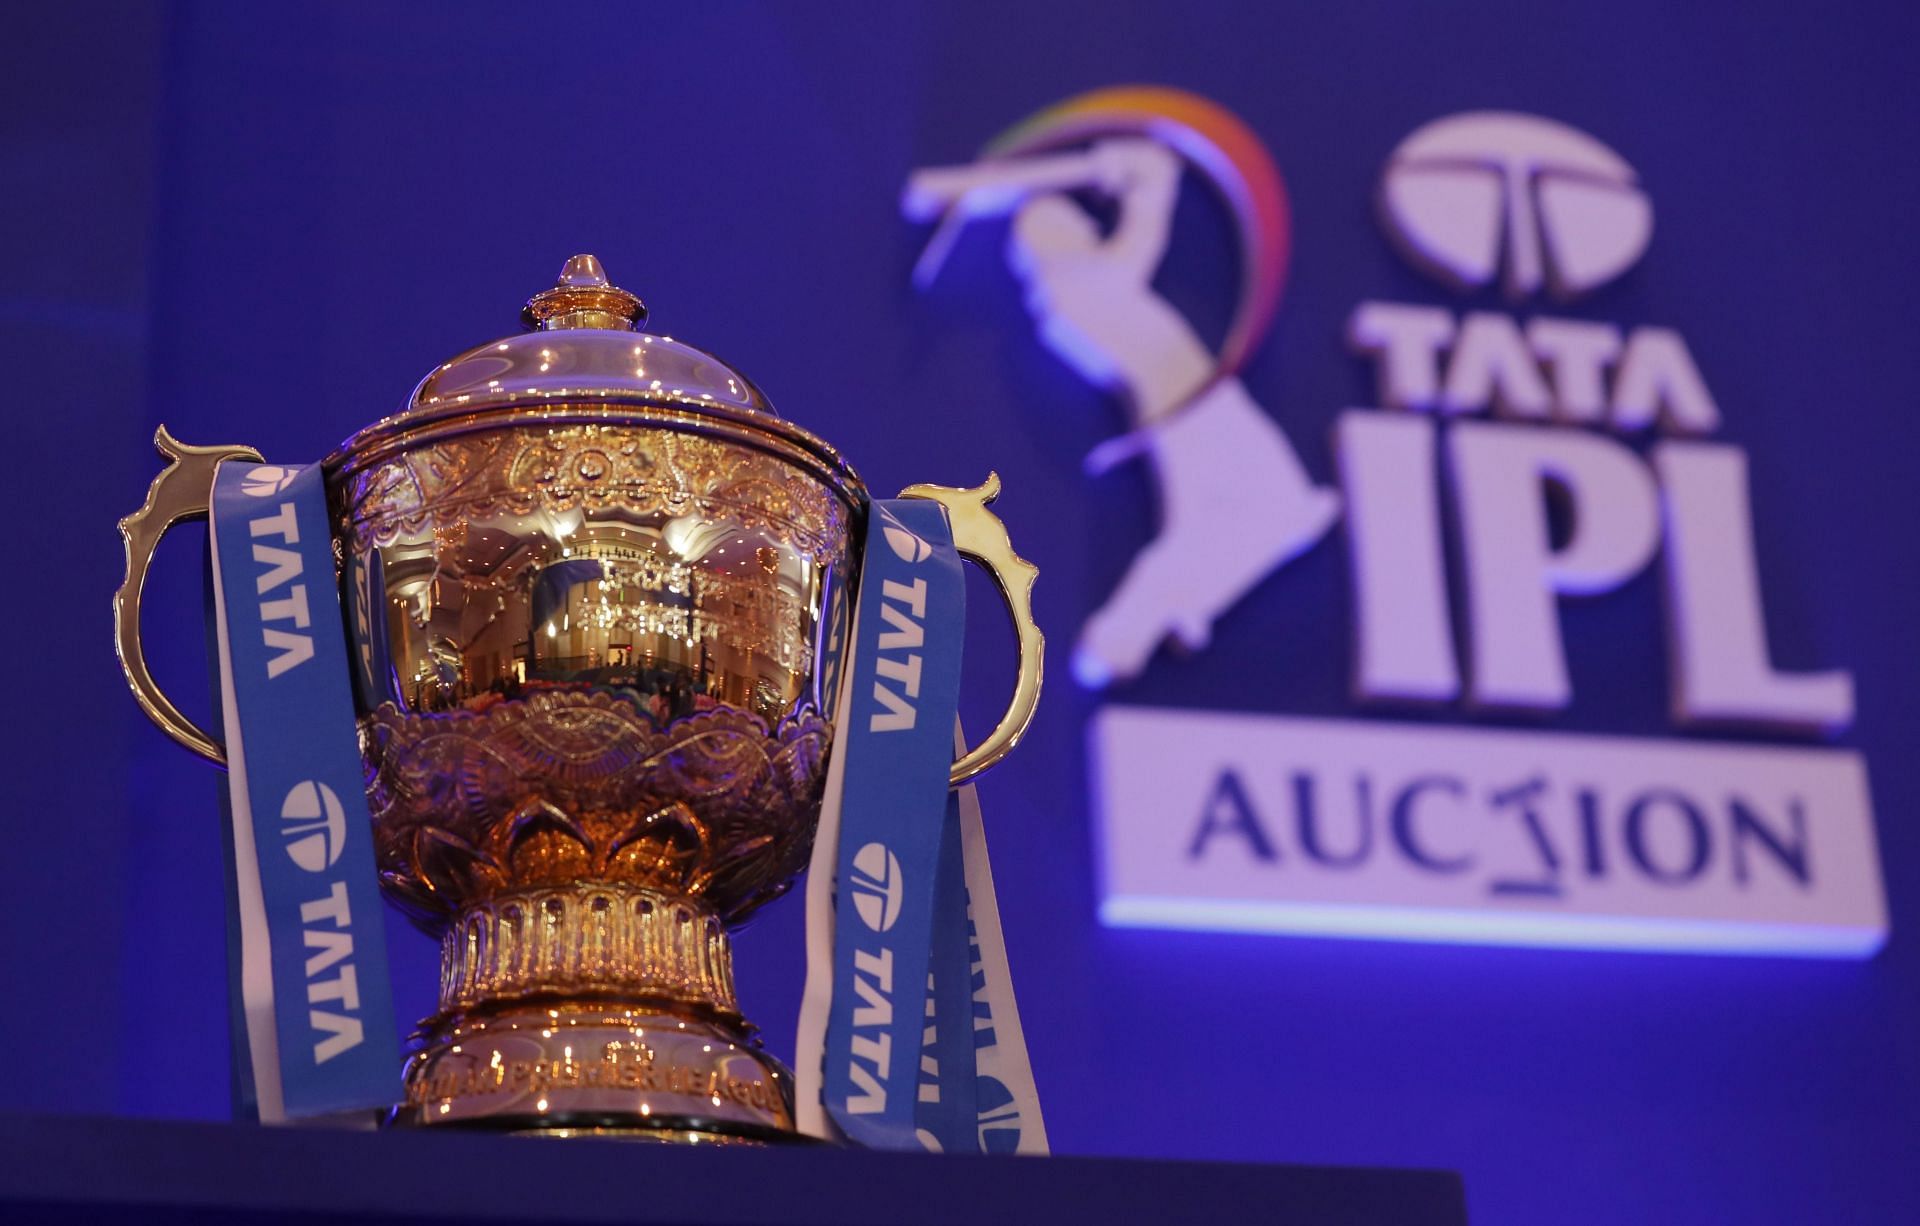 IPL 2022 will commence on March 26 (Credit: BCCI/IPL).